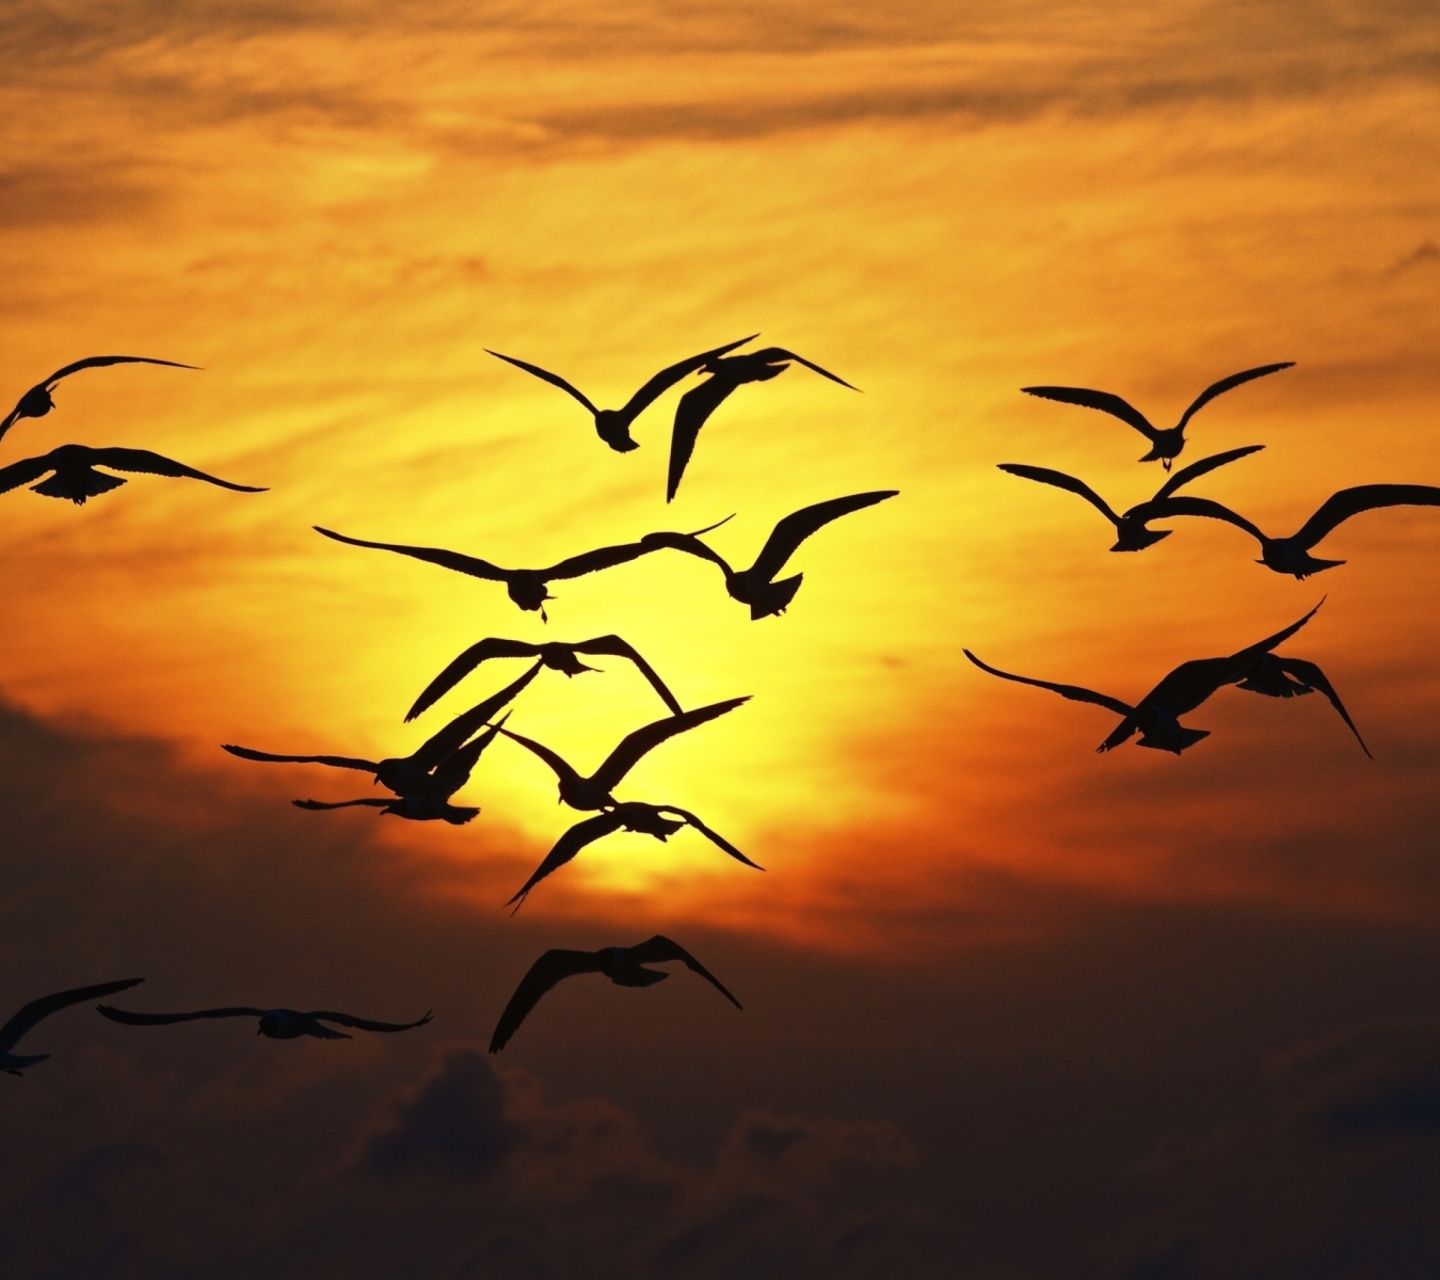 Birds Silhouettes At Sunset wallpaper 1440x1280